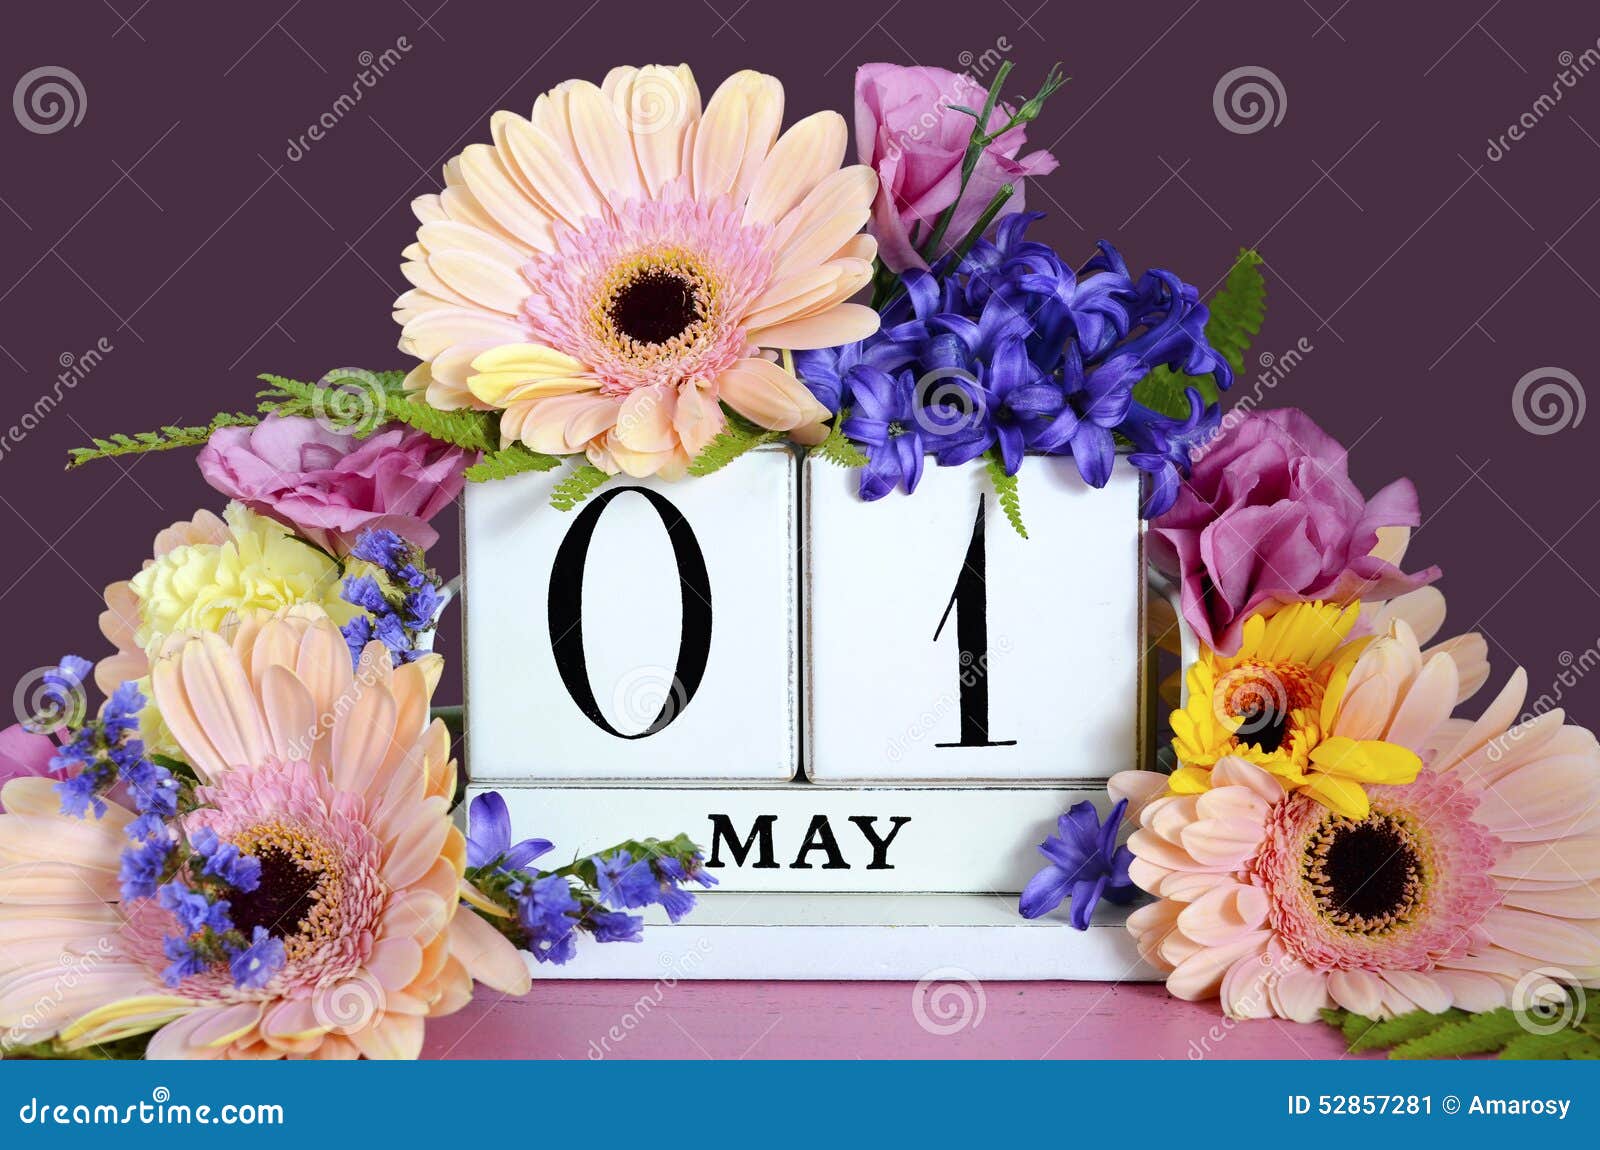 Happy May Day Calendar with Flowers. Stock Image Image of table